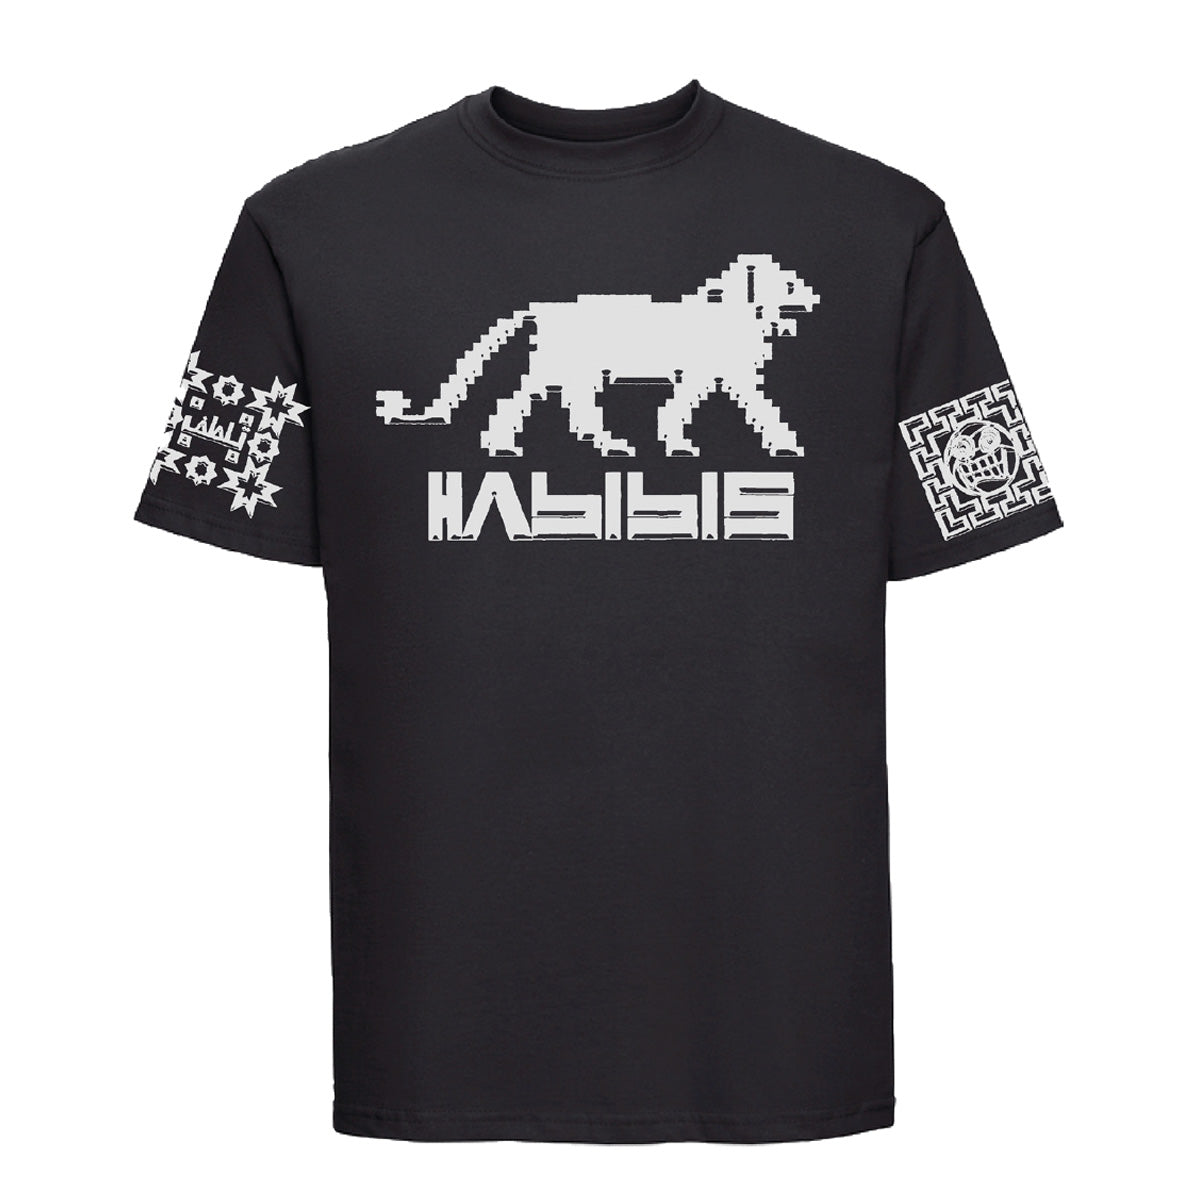 Black habibis shortsleeve T-shirt with silver lion graphic logo on front and sleeves. Free uk shipping over £50